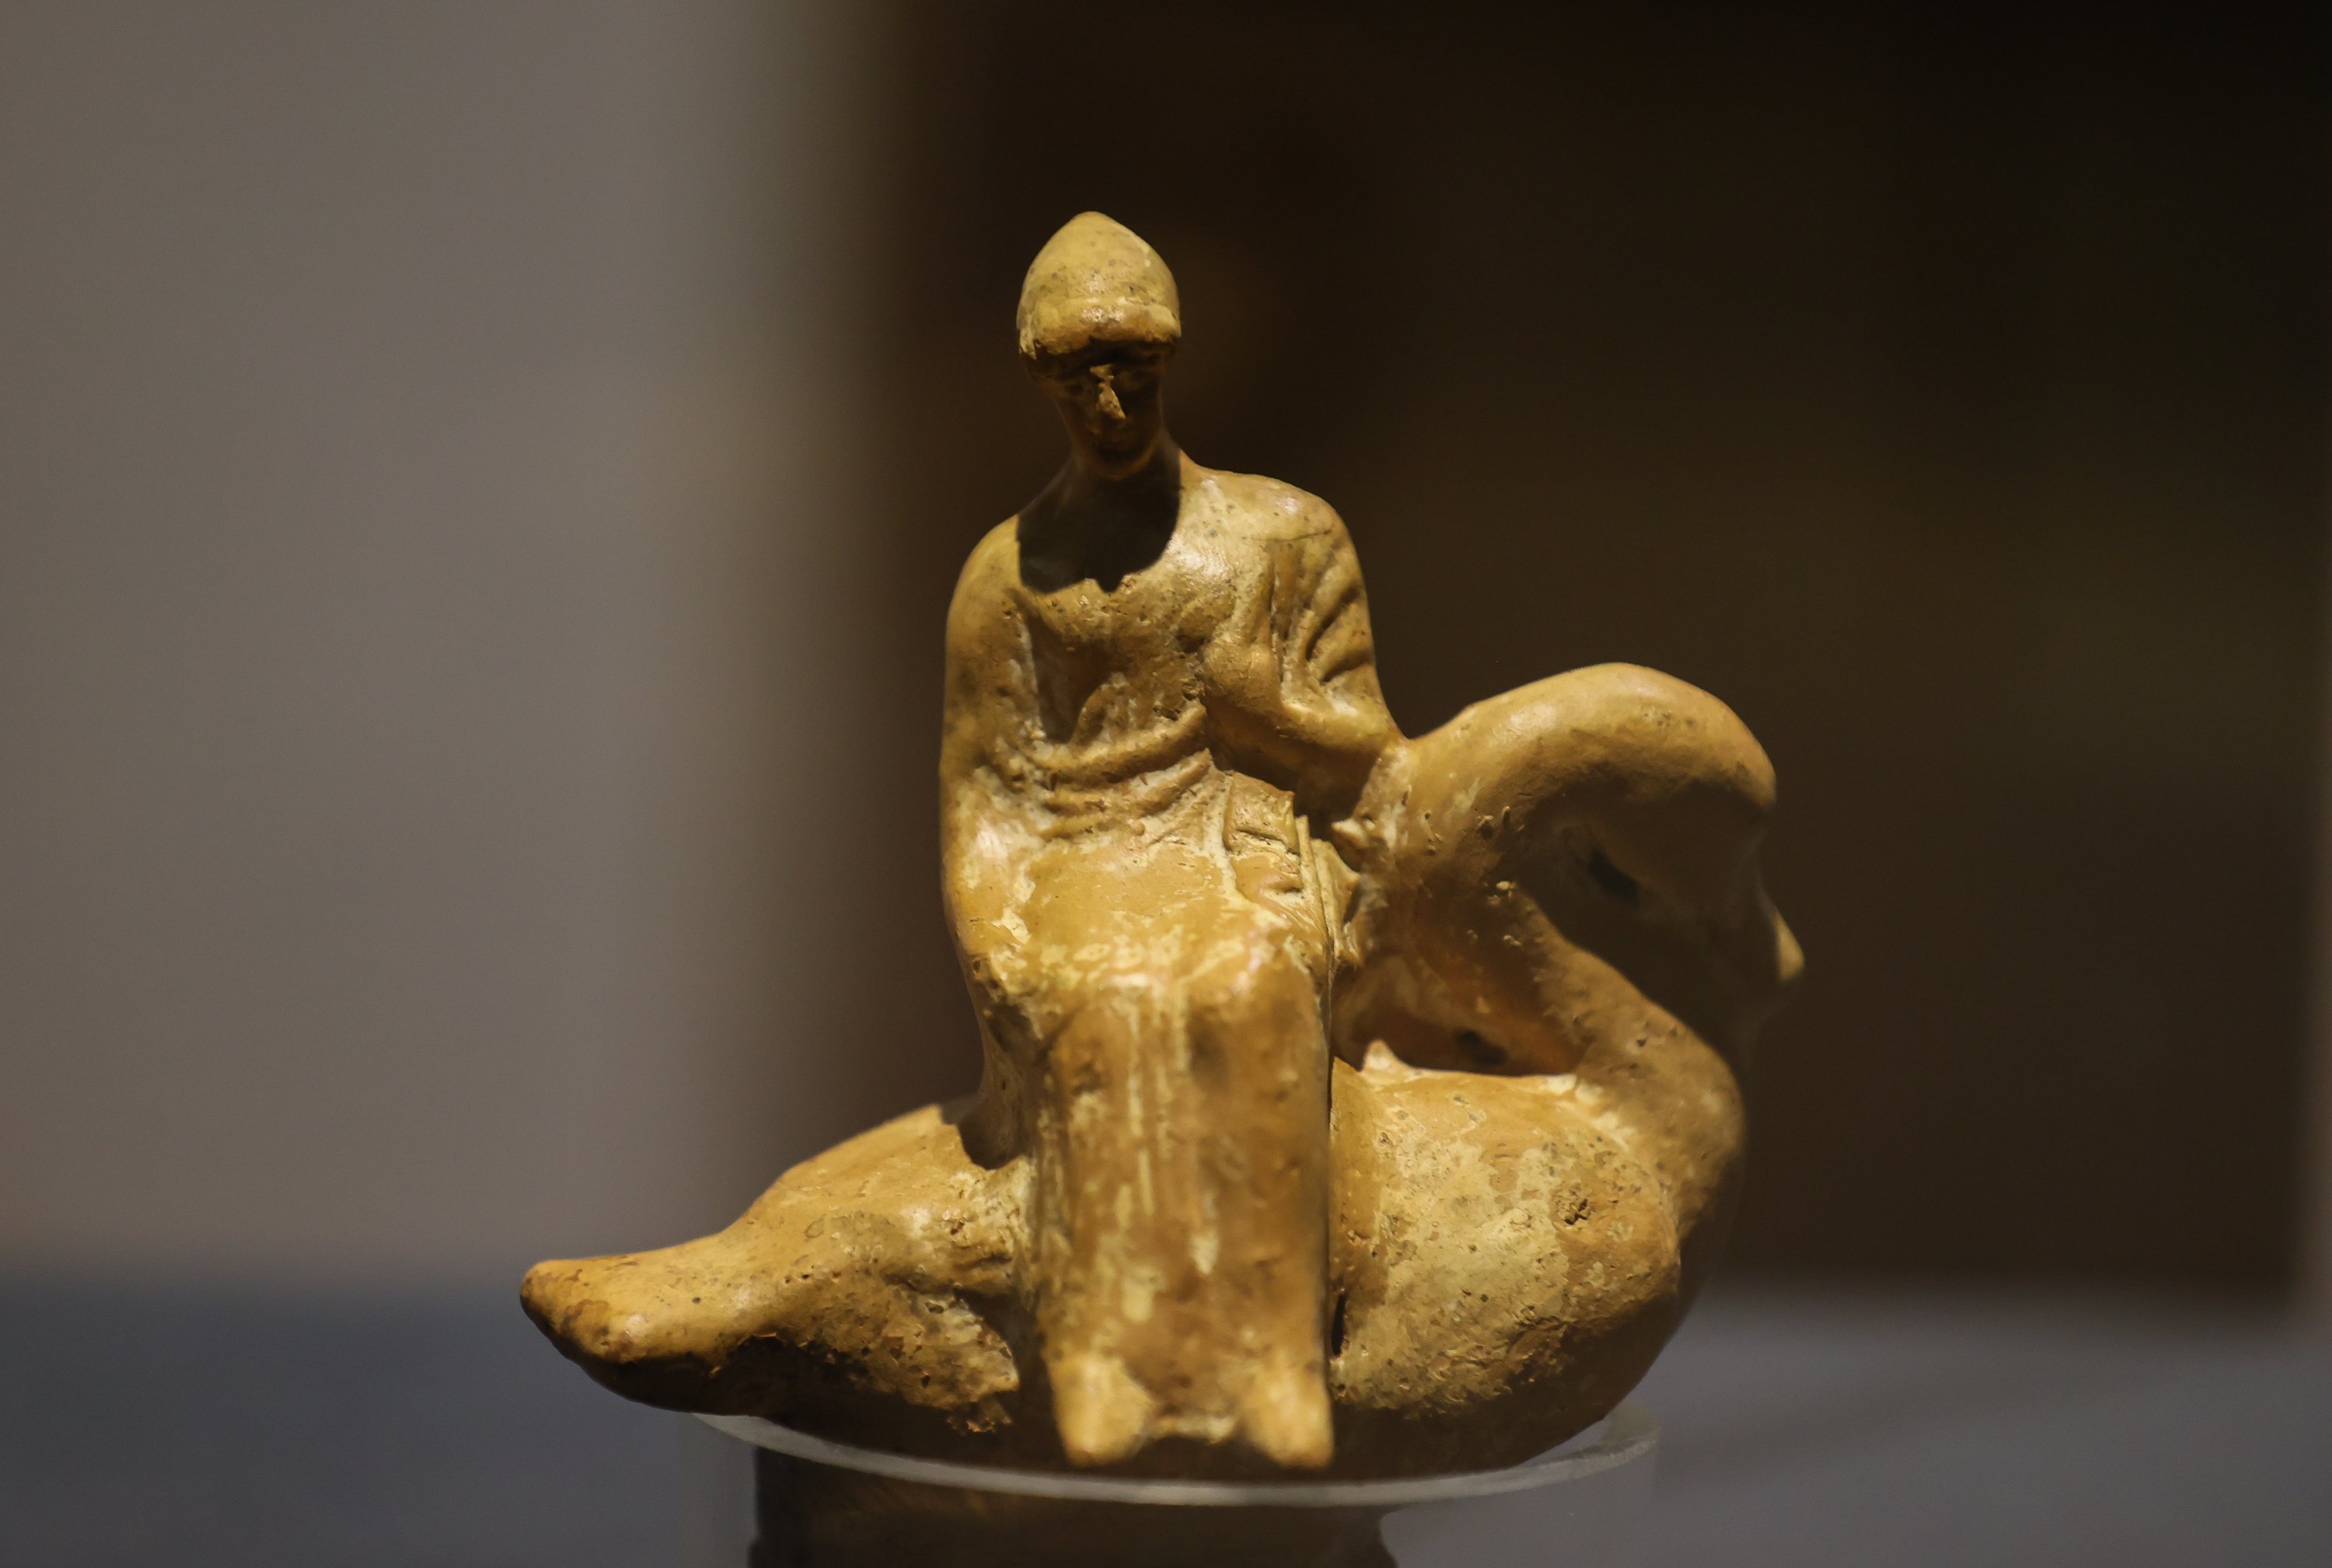 The statuette of Leda, the queen of Sparta, on display for the first time at the Izmir Archeology Museum, Türkiye, Nov. 15, 2022. (AA Photo)